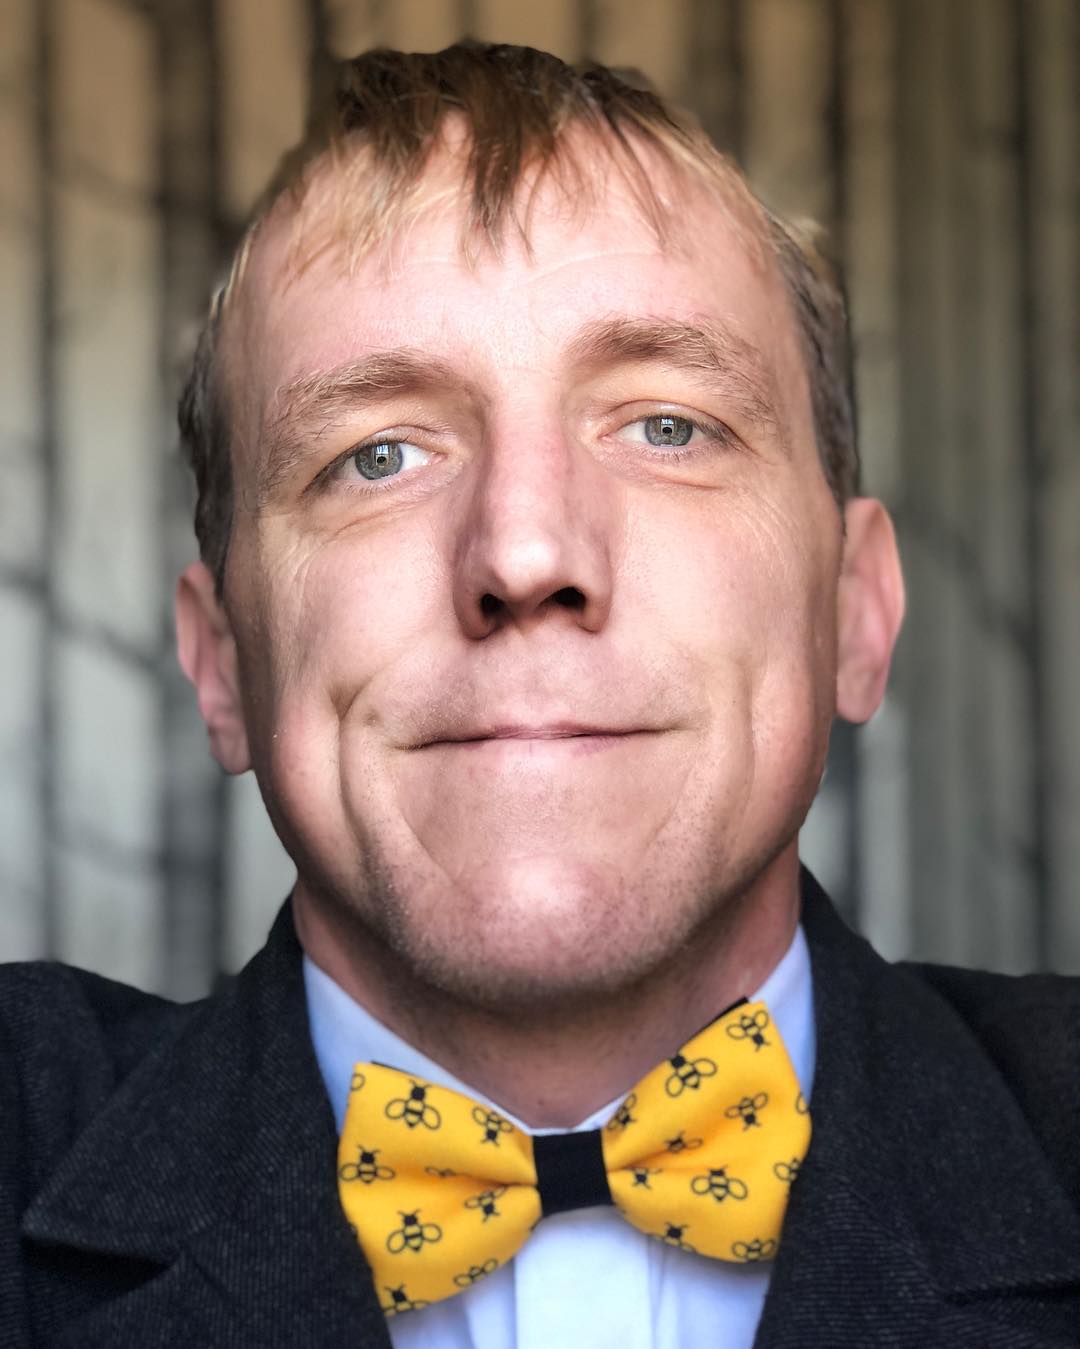 Week 3 of #beeschool & #tiedayfriday mashup. Tie c/o Marcus Elliot. FWIW – send me a bee related tie to wear and I’ll send you a tie in return. Include your address with tie ;)